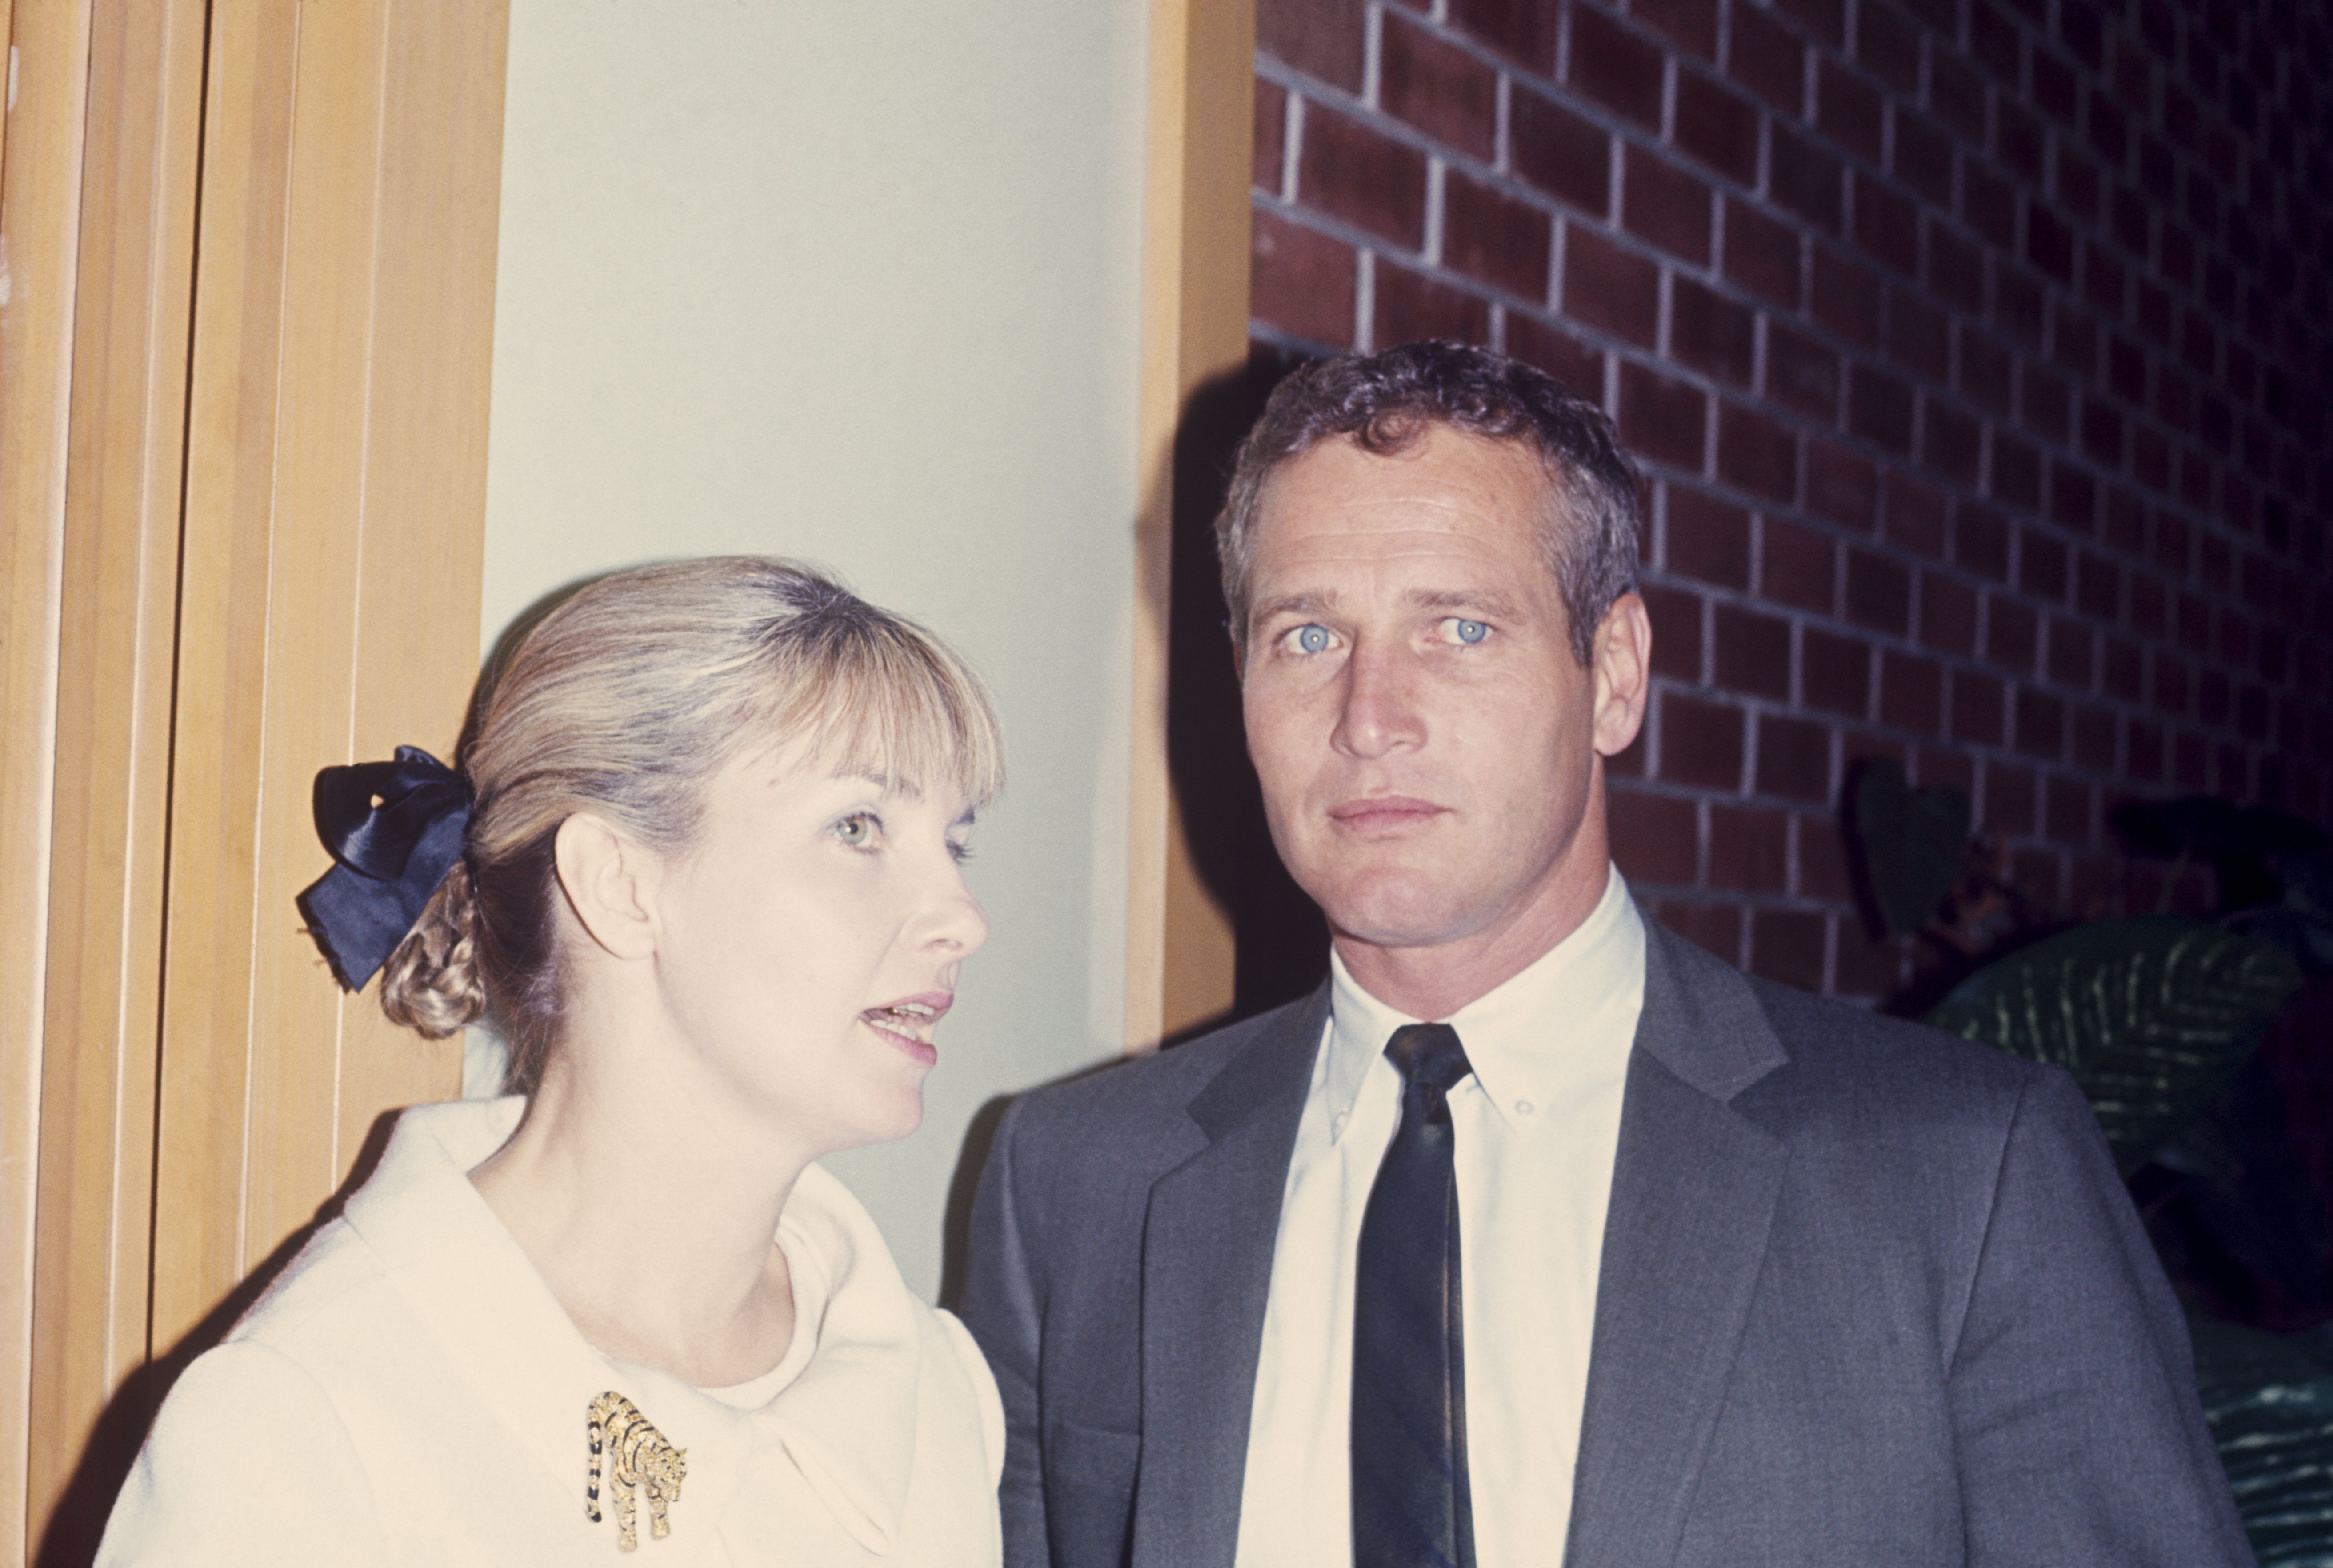 Paul Newman and Joanne Woodward in 1970 in New York. | Source: Getty Images